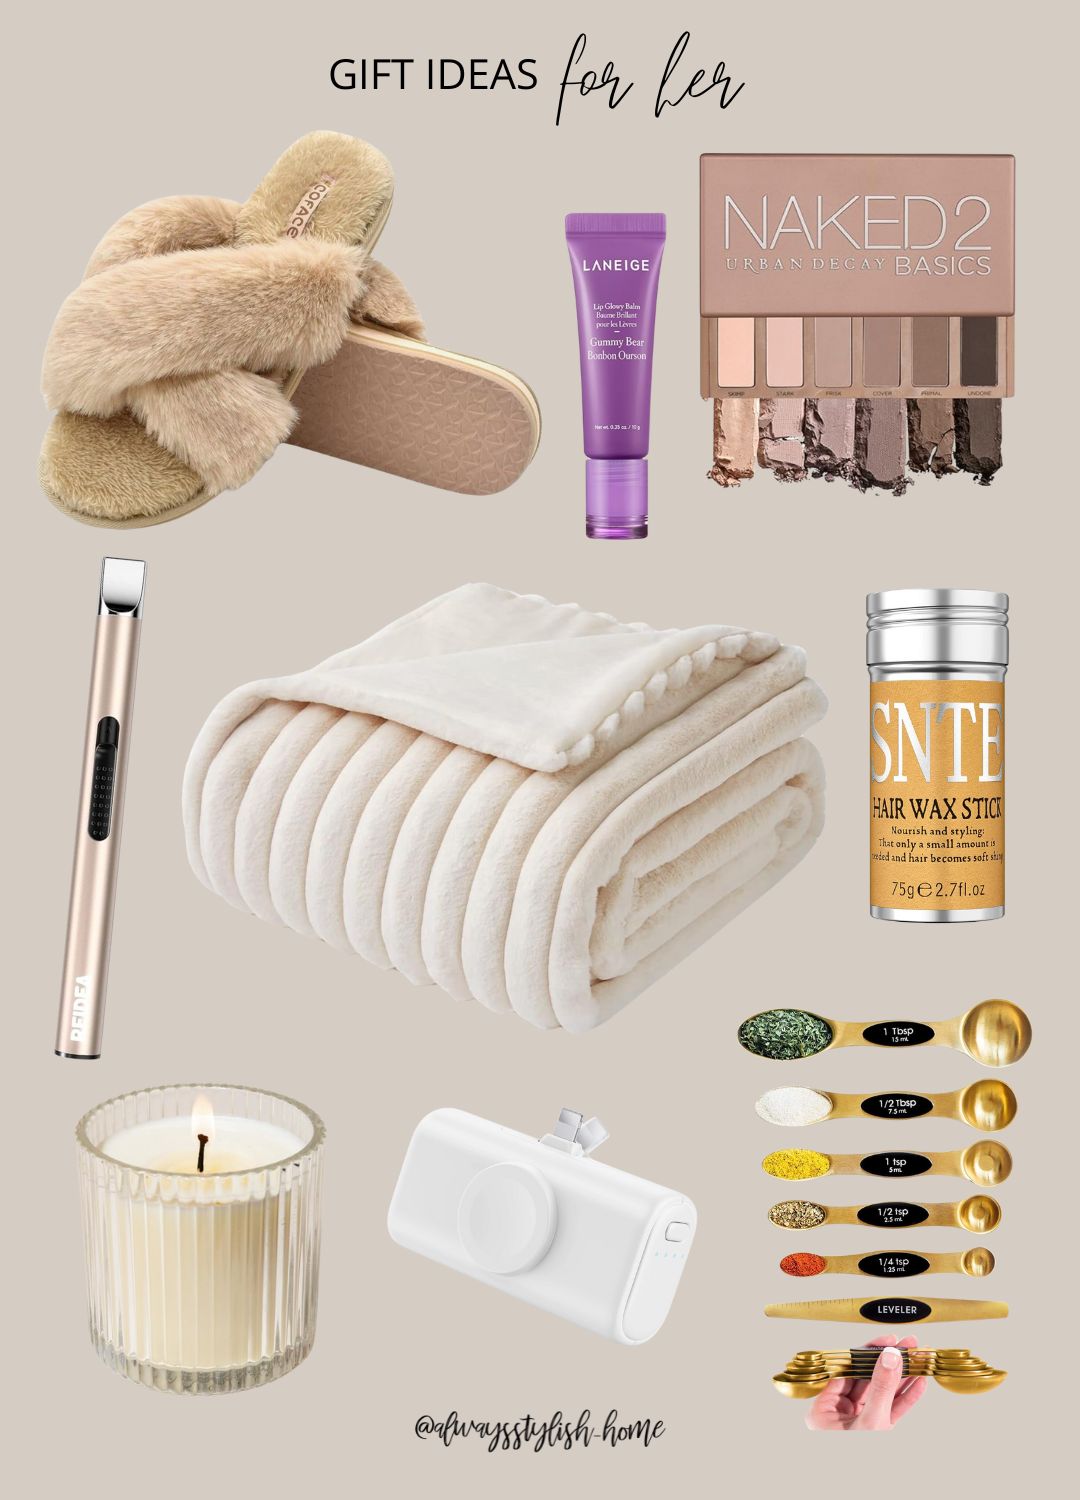 Gift ideas for her, stocking stuffer, fuzzy slippers, gold measuring spoons, naked eyeshadow palette, fluted glass candle, portable charger, laneige lip balm, hair wax stick, electronic lighter, faux fur channel throw blanket | Amazon (US)